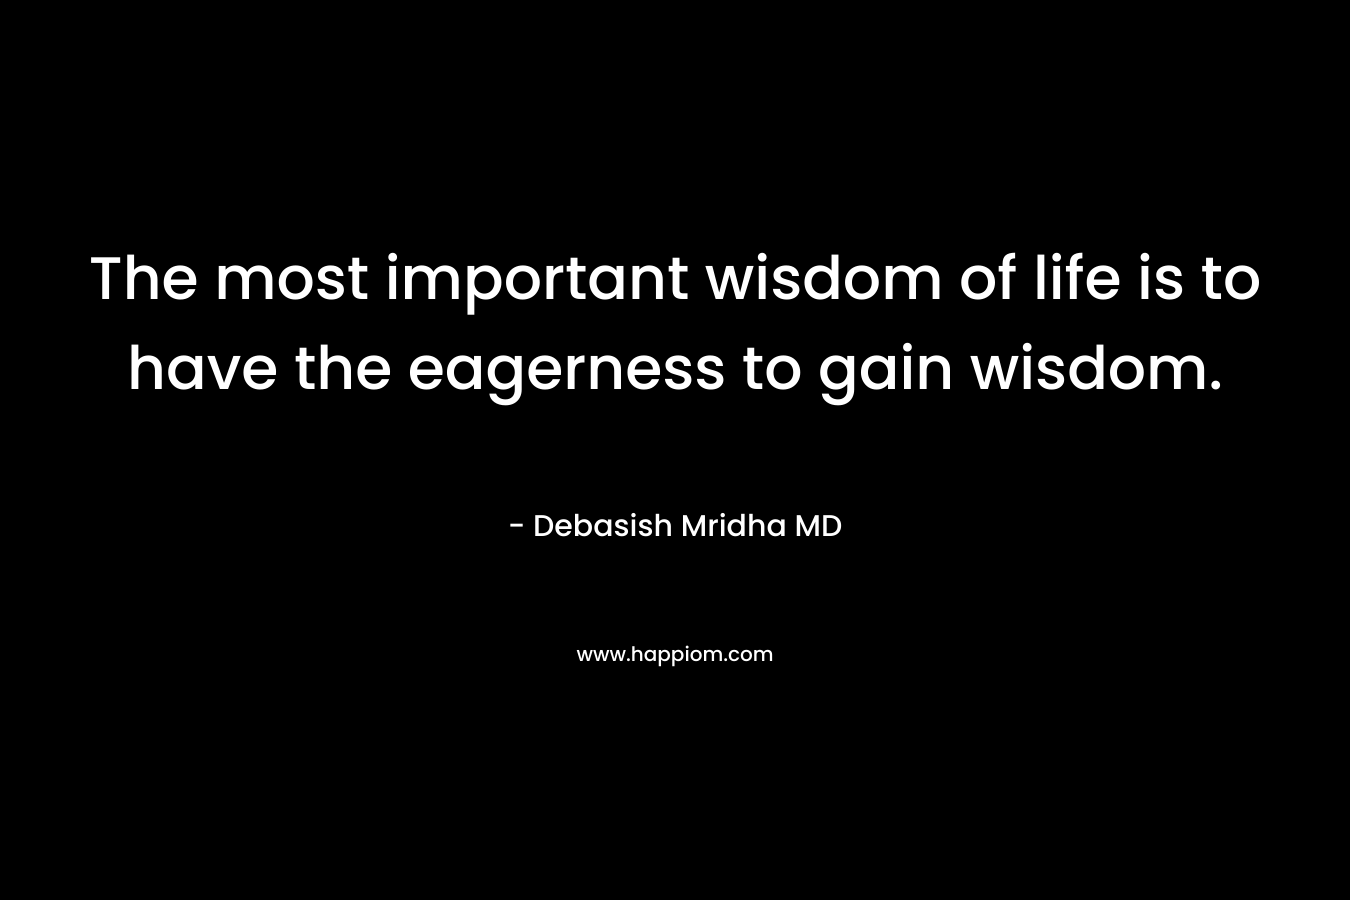 The most important wisdom of life is to have the eagerness to gain wisdom.